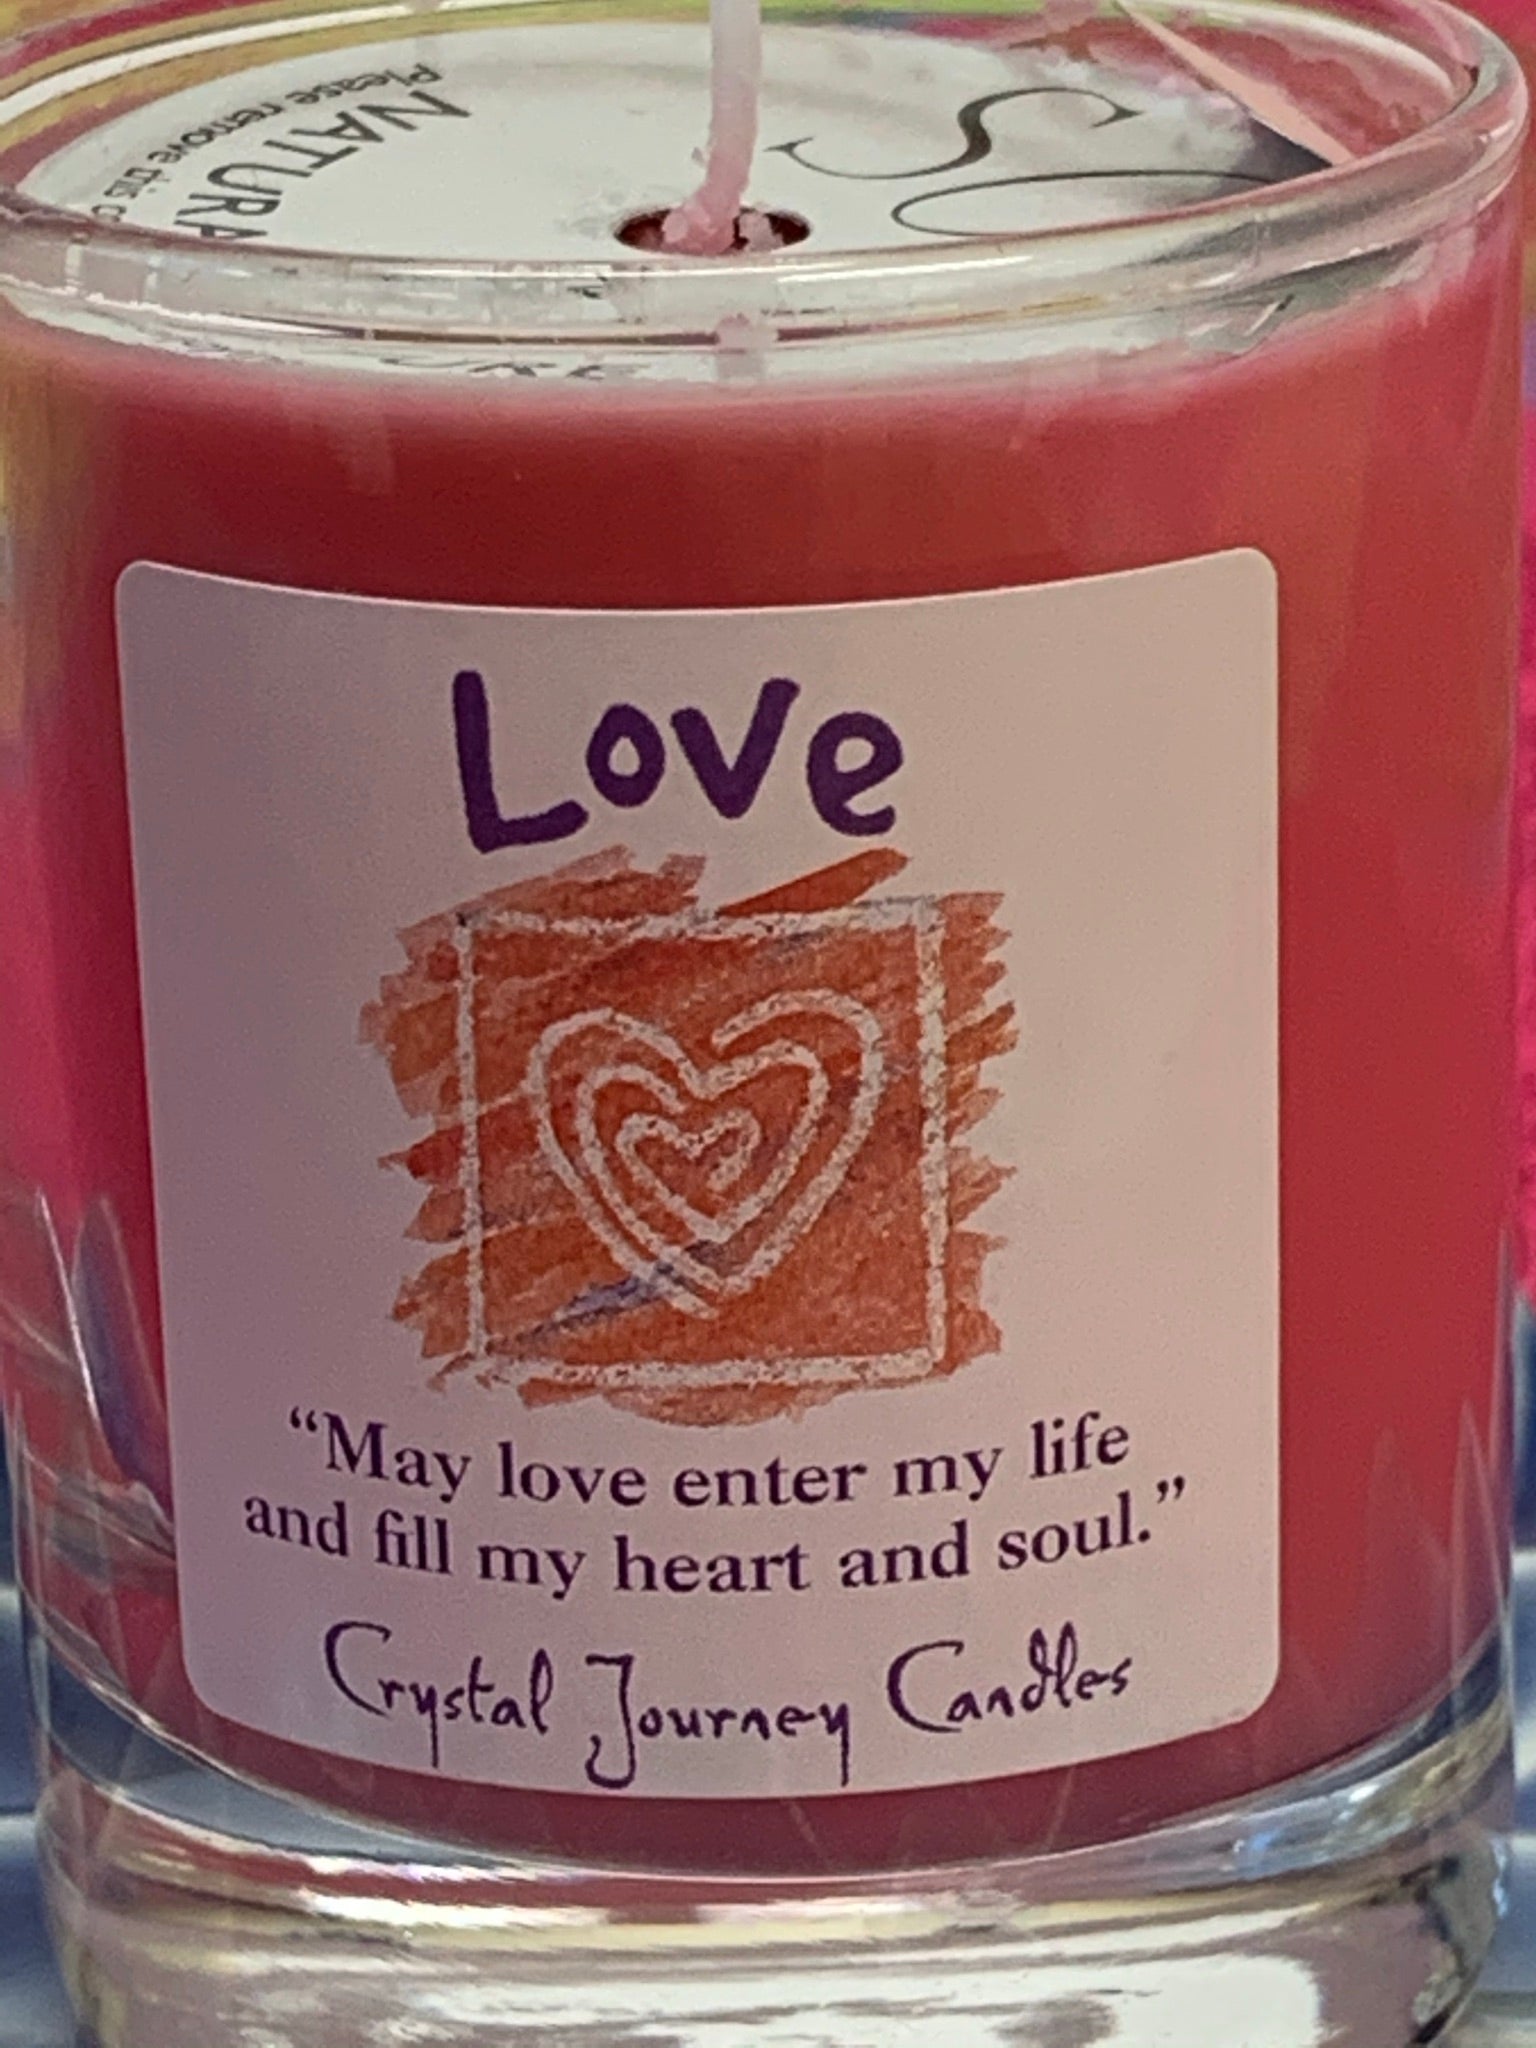 Close-up of the handcrafted pink votive candle in a glass holder. The wax is soy-based (no paraffin) and is also vegan. Wicks are made with paper and cotton only. It comes with an attractive label stating the intention/purpose of the candle, "Love," and an affirmation for your use: "May love enter my life and fill my heart and soul."